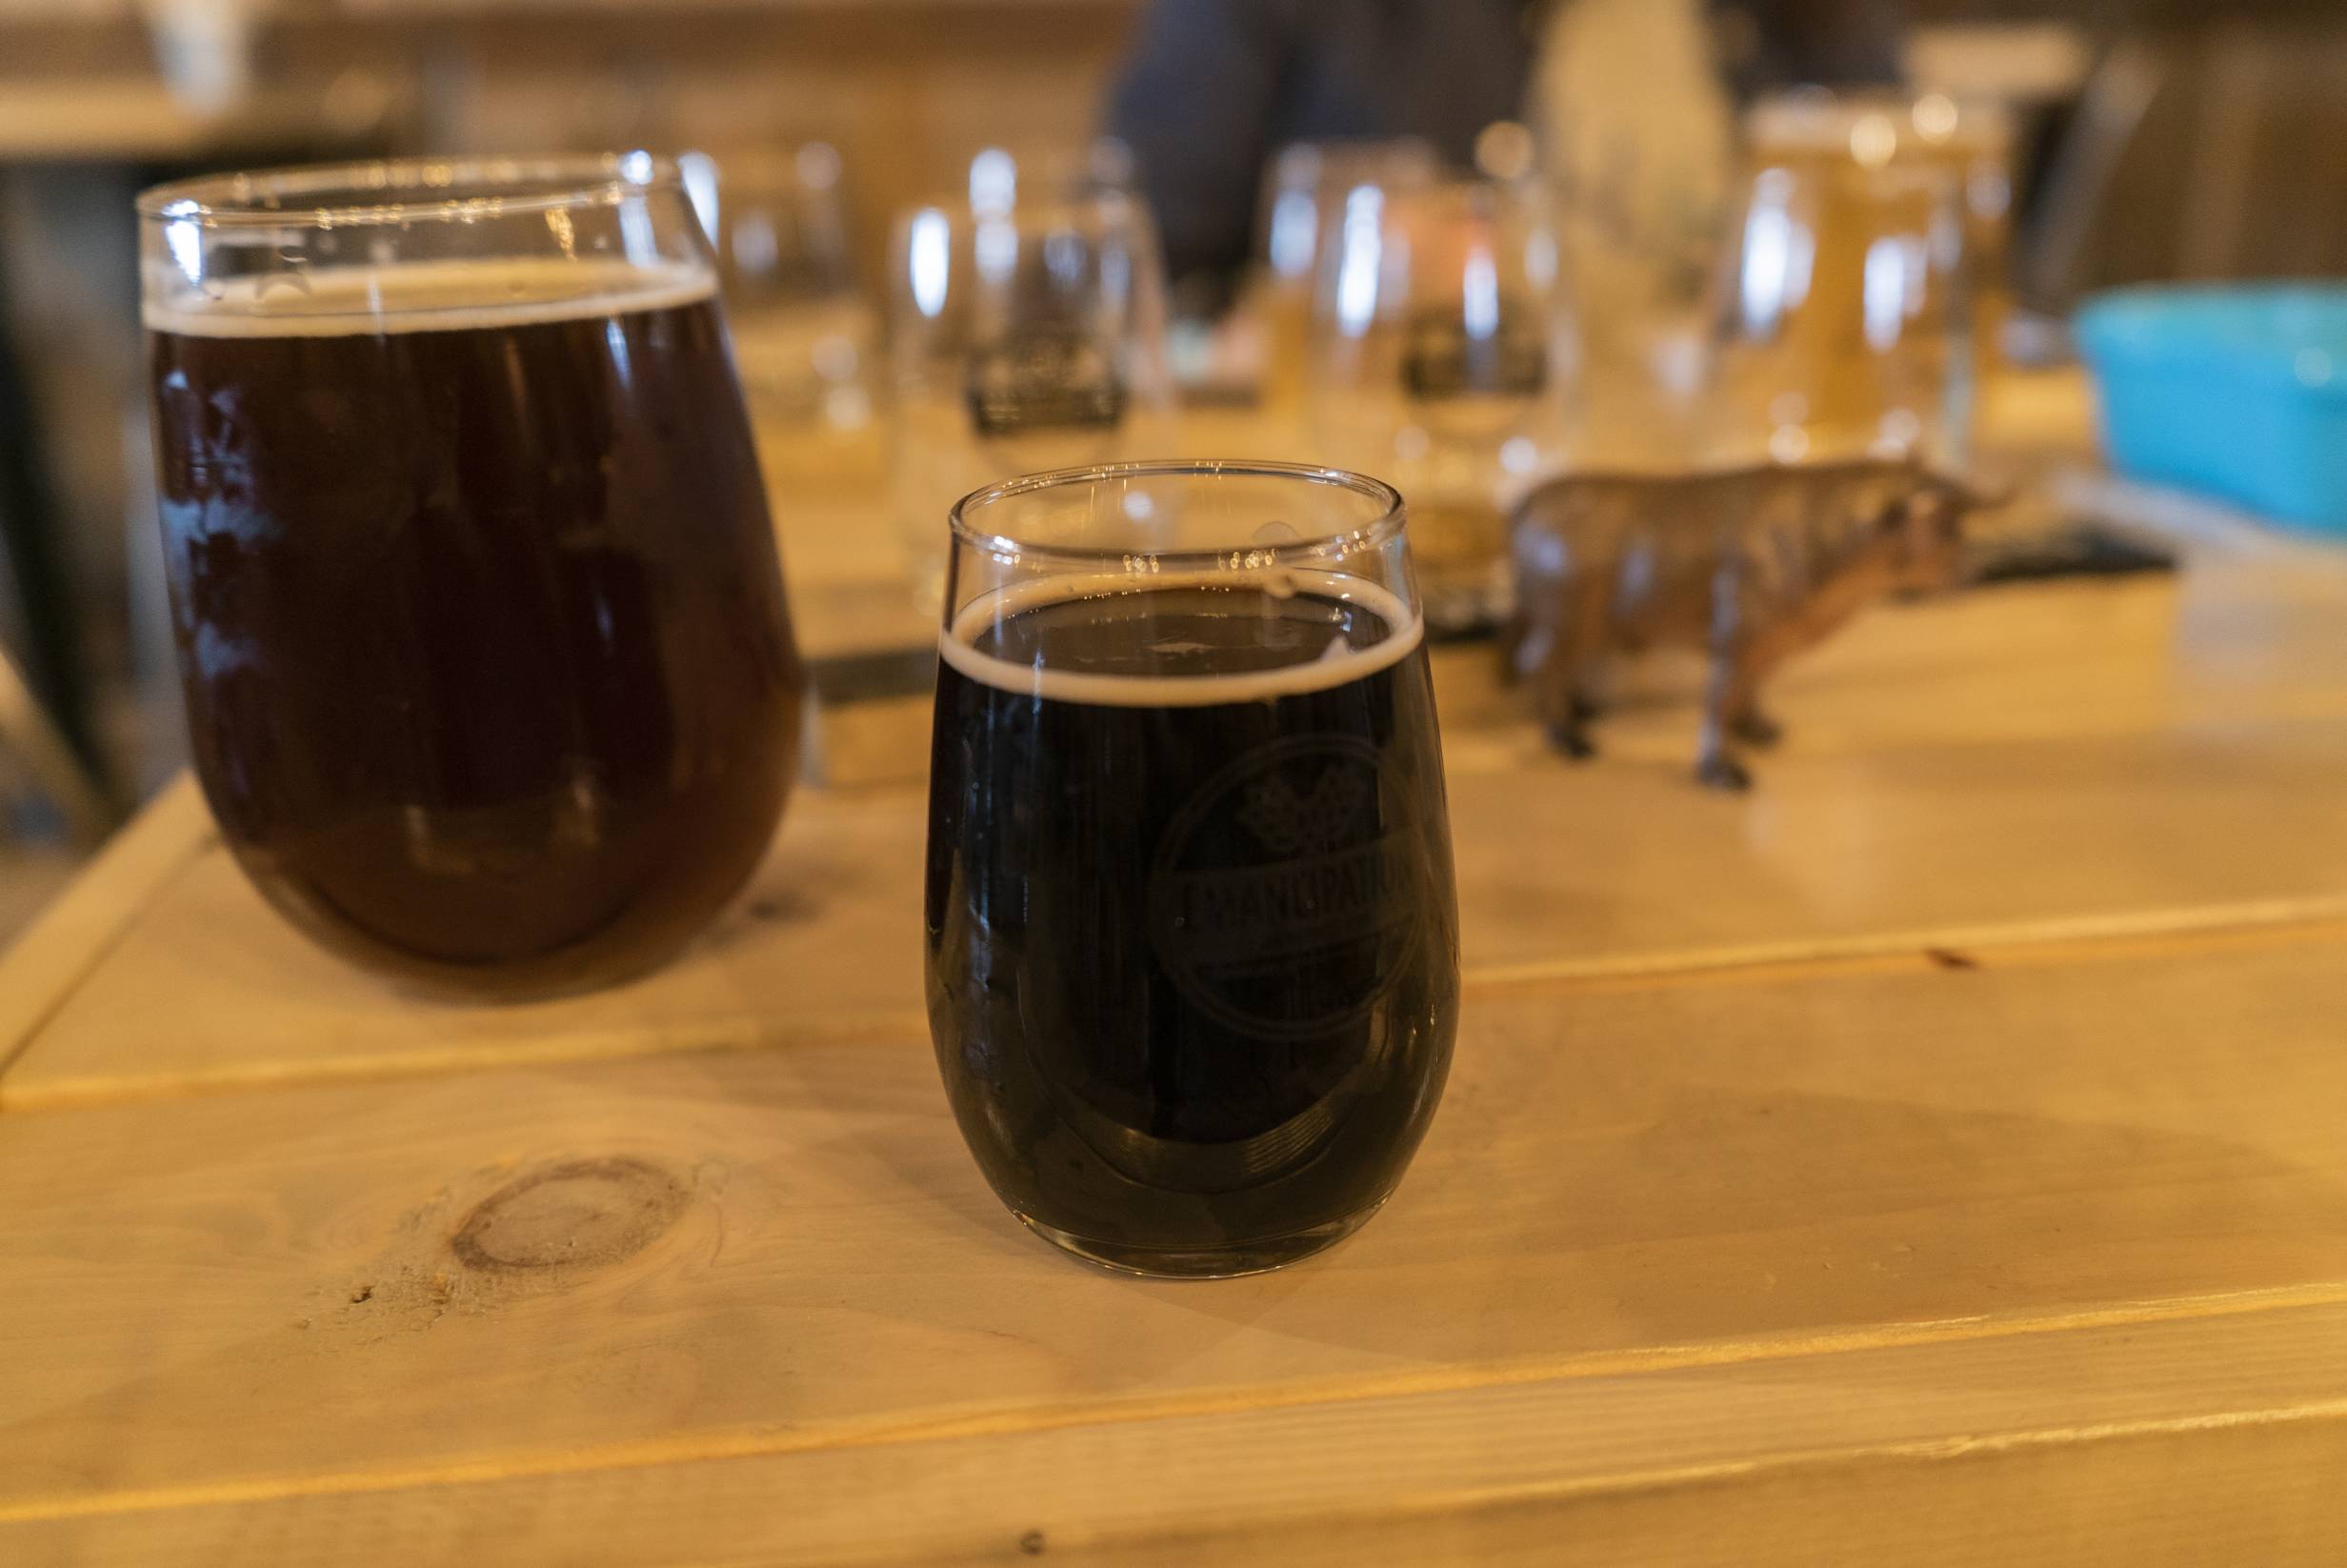 A small tumbler glass filled with a dark liquid sits on a light wood table. Behind it is a larger tumbler glass filled with a reddish brown liquid. Beer from Emancipation Brewing. Photo by Jordan Goebig. 